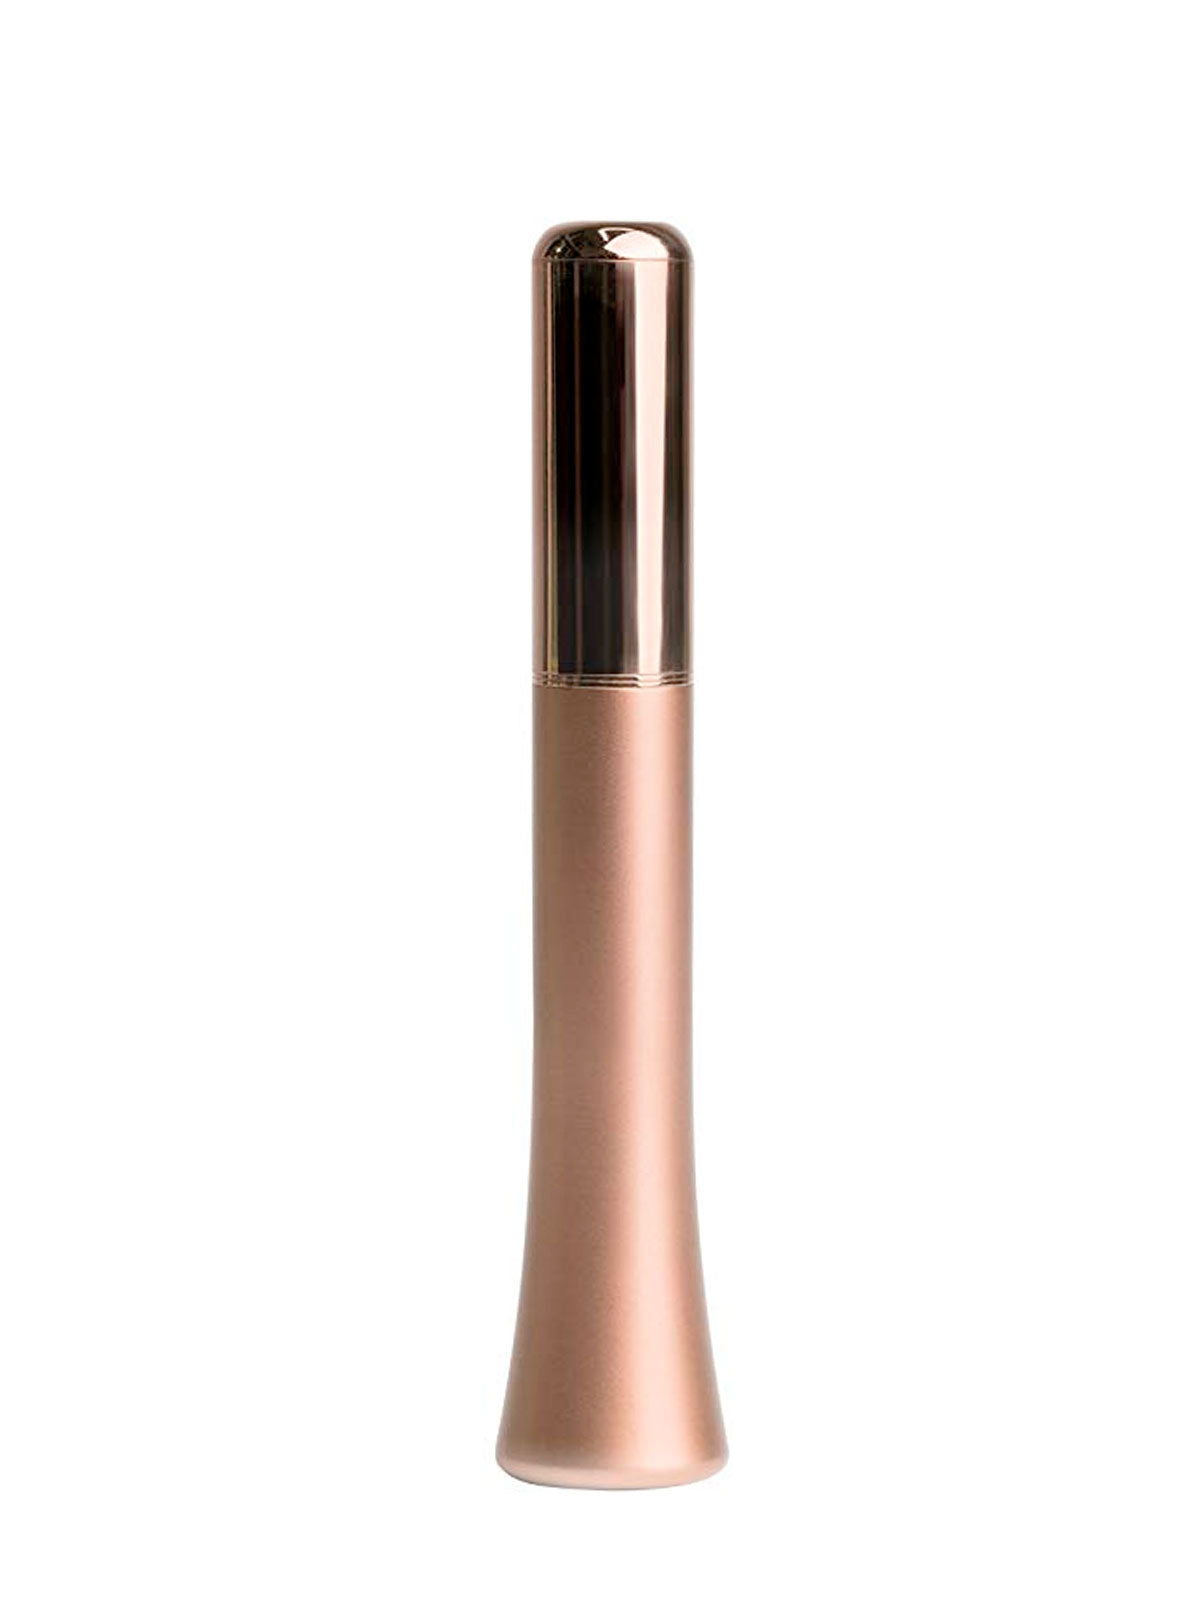 Wink+ clitoral vibrator by Crave